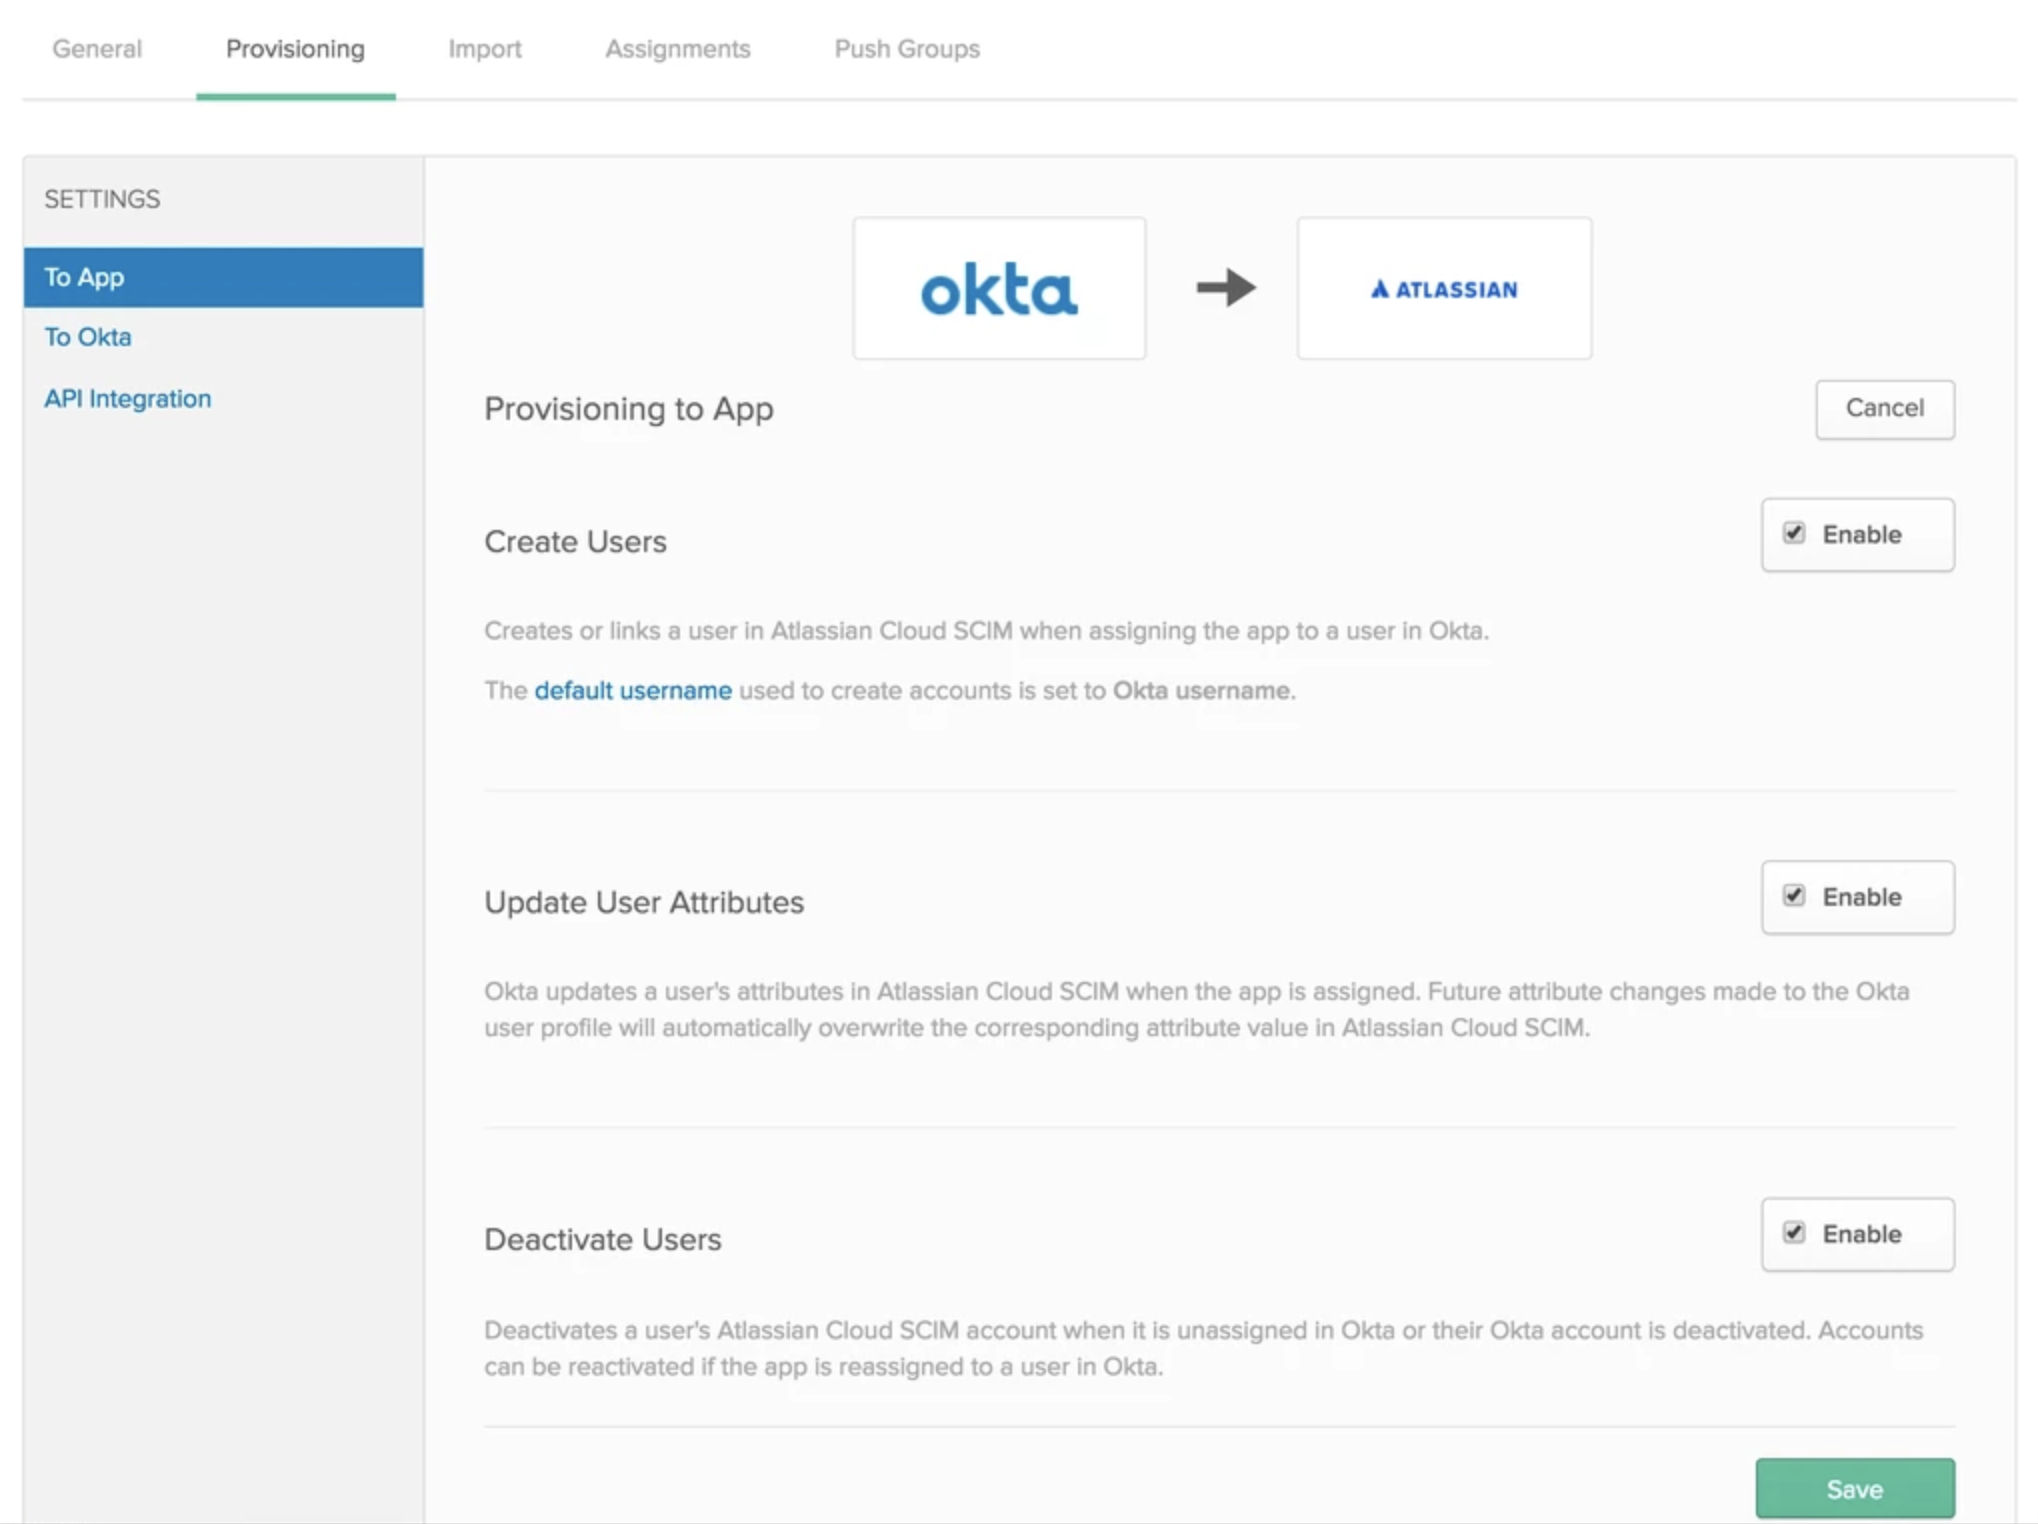 Provisioning Okta to app with option to cancel. Enable/disable create users, update user attributes, deactivate users.